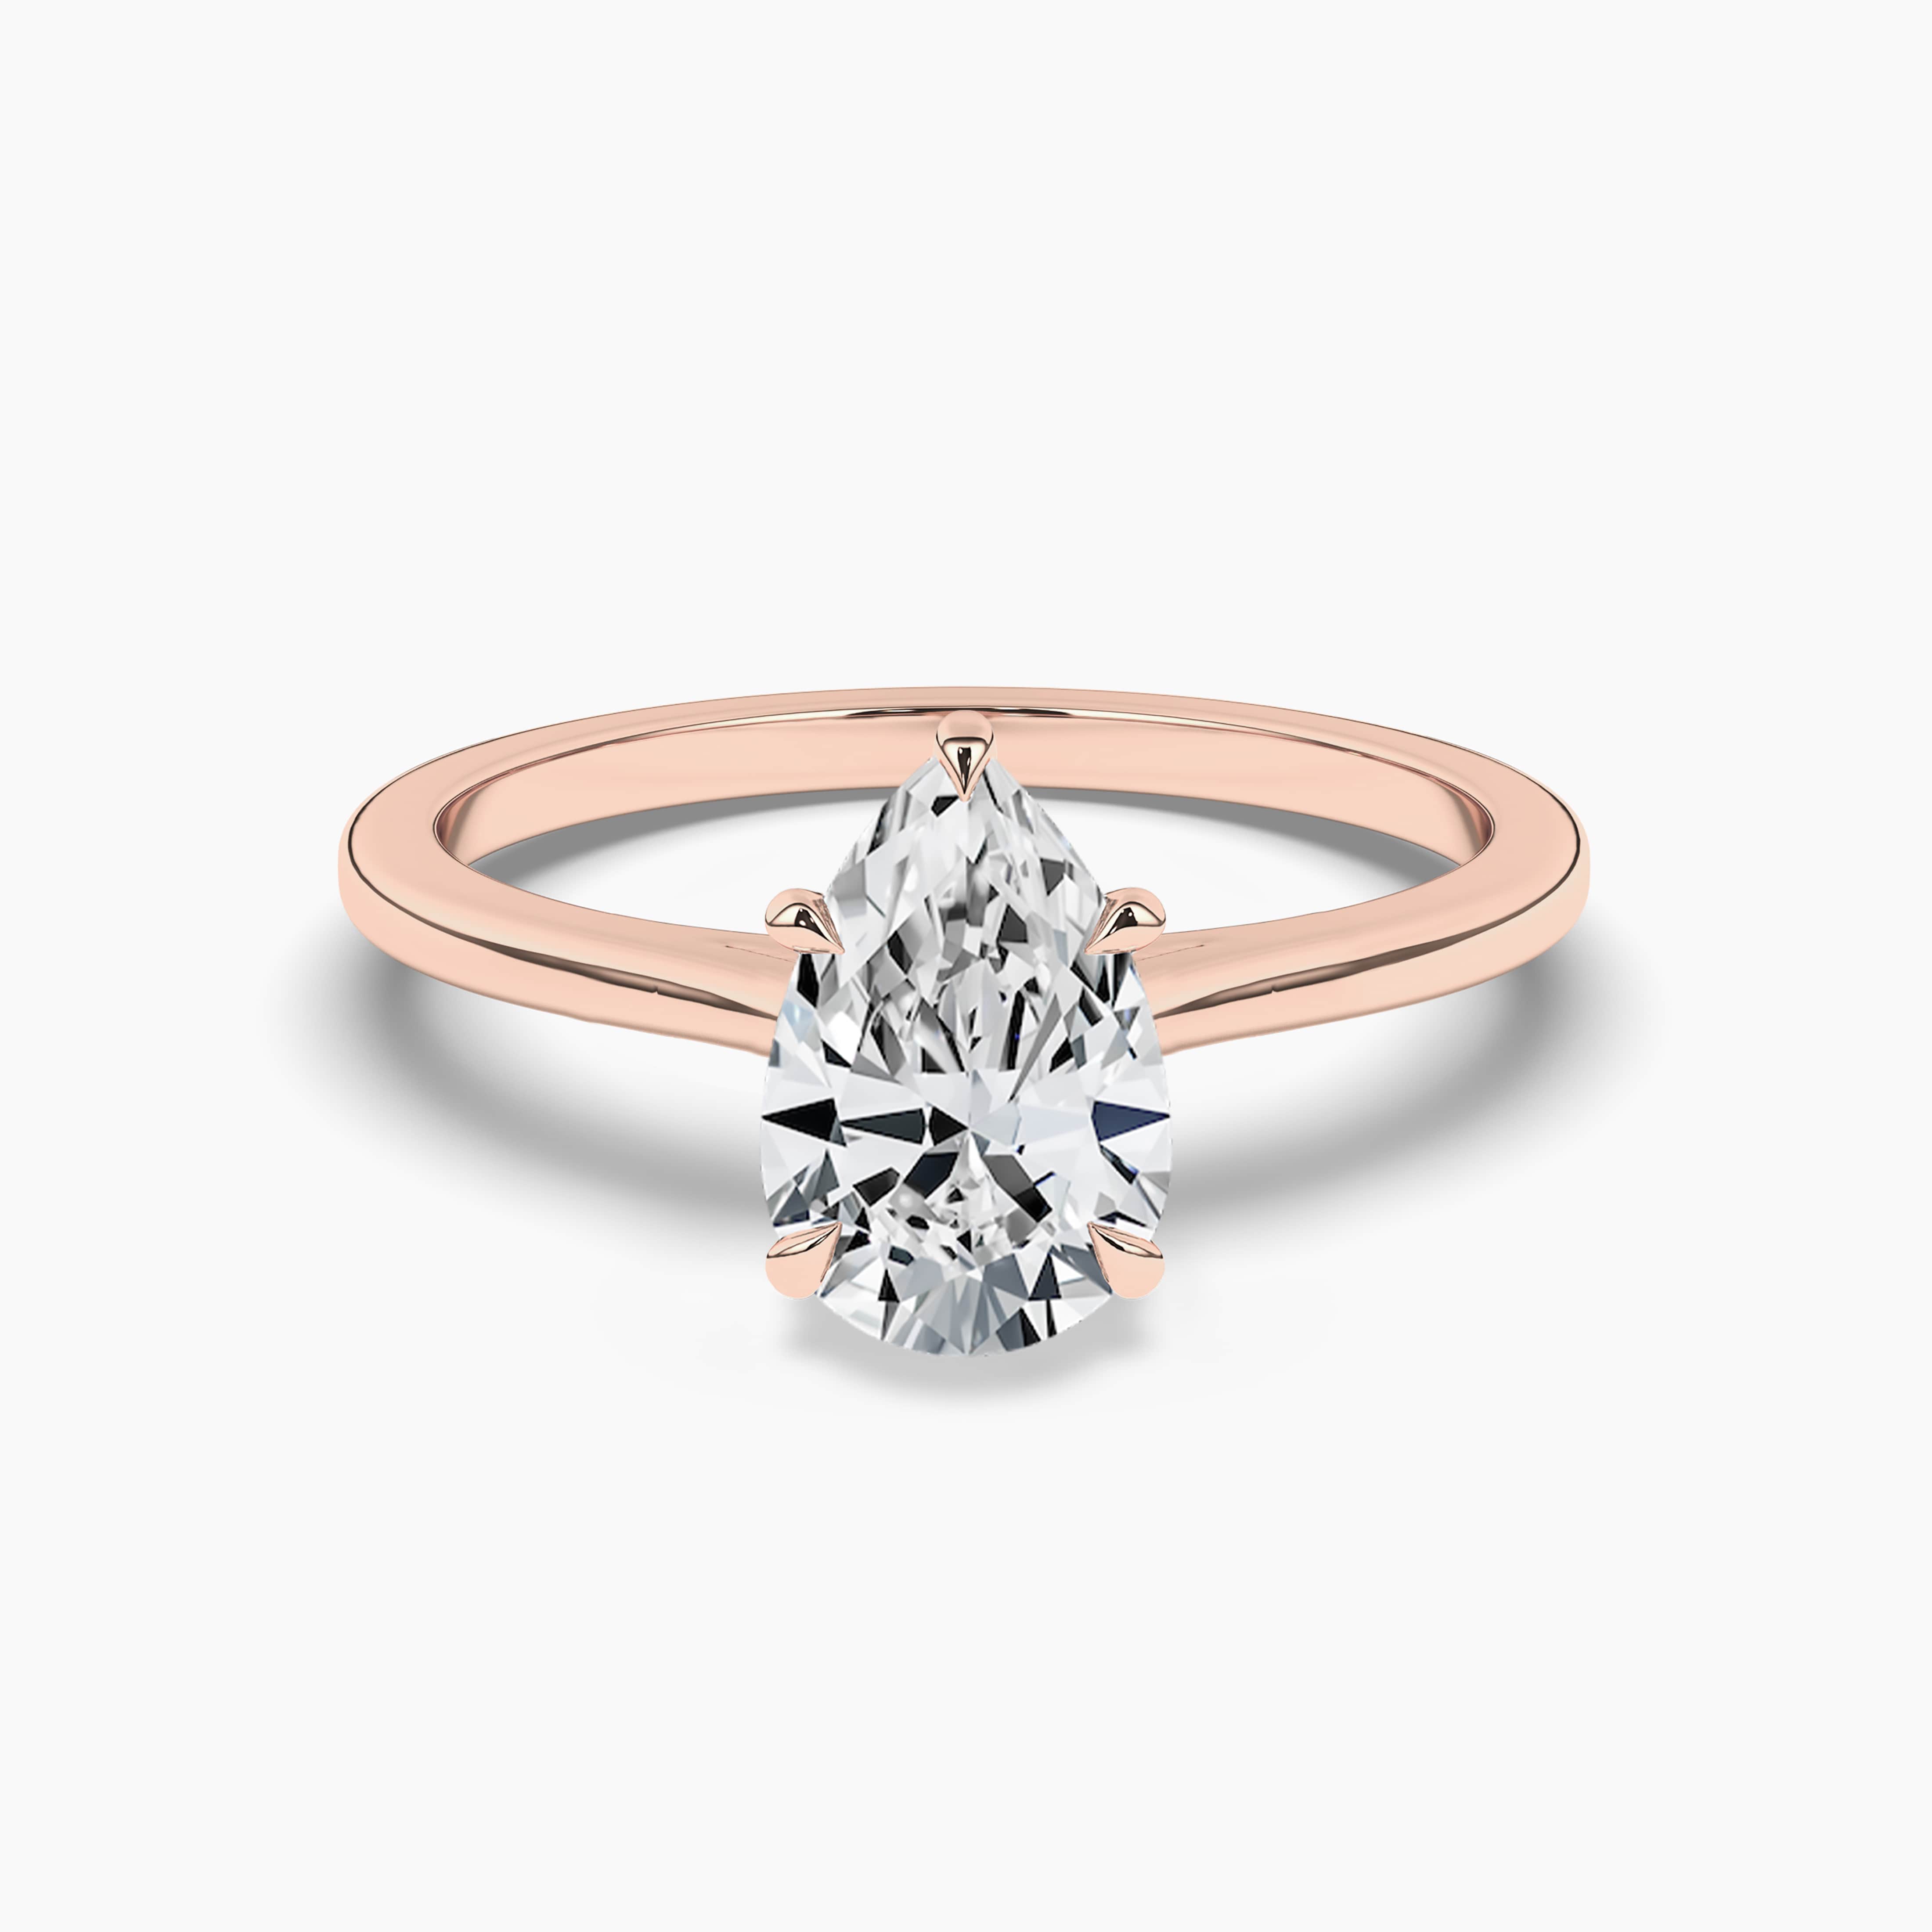 Pear Shaped Engagement Ring. Solitaire Ring. Rose Gold Wedding Ring. Promise Ring